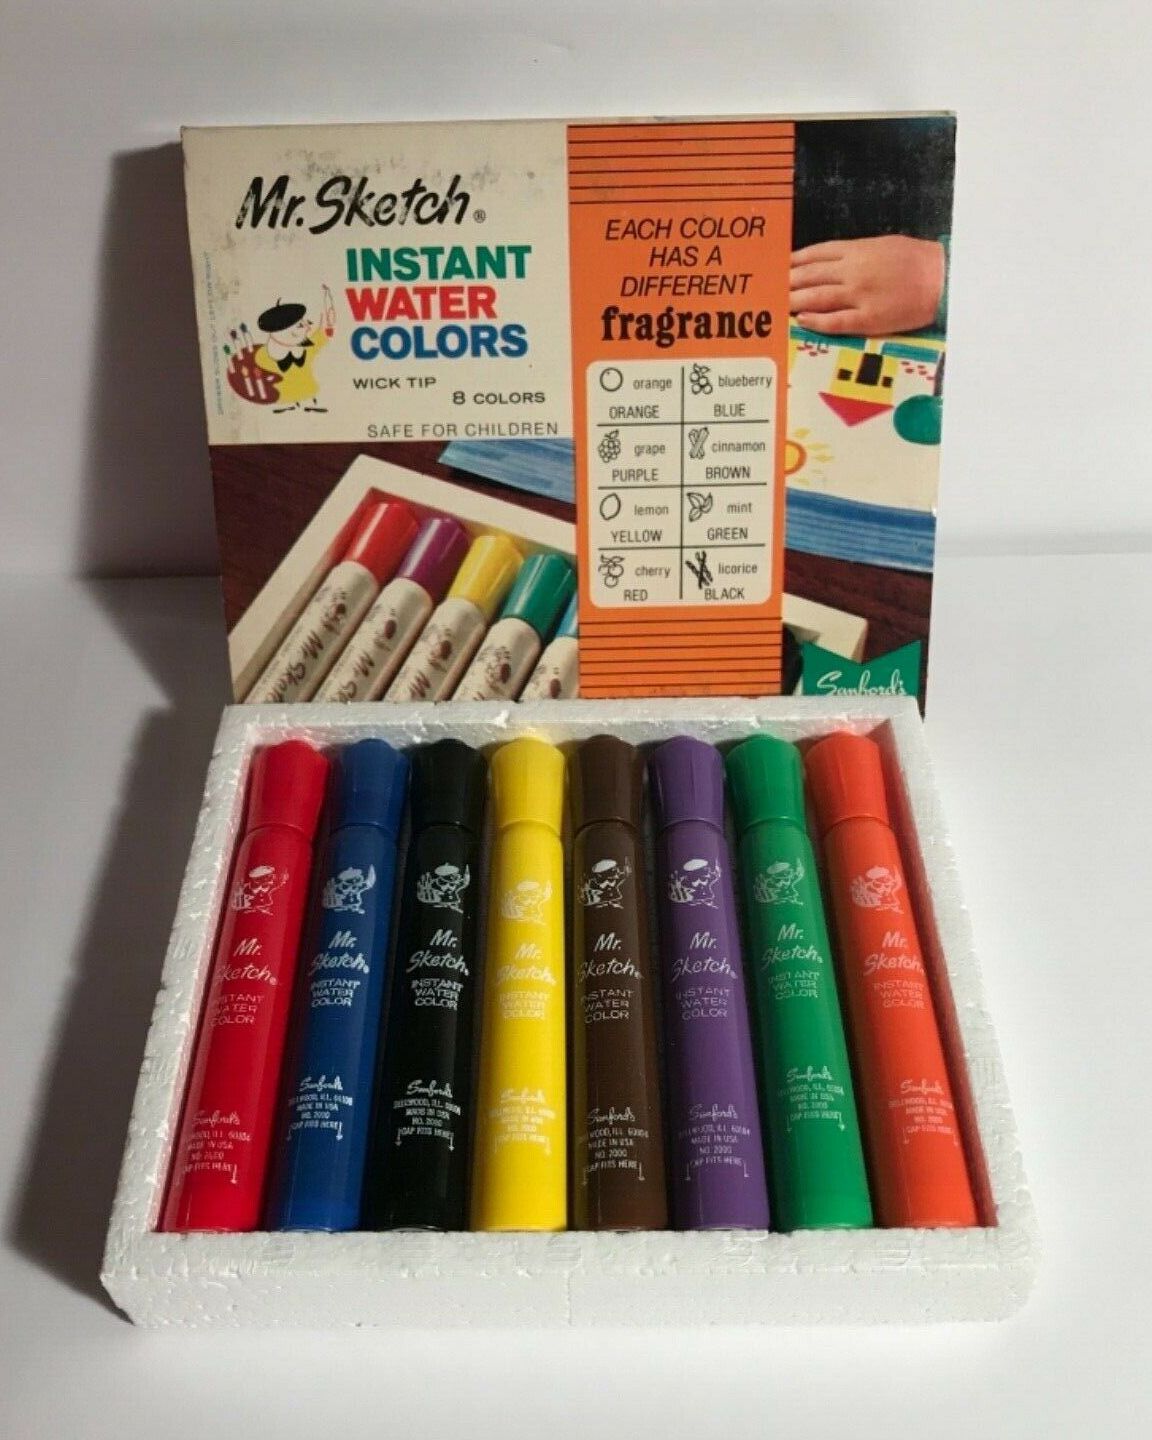 Markers used to be a sweeter-smelling affair. Mr. Sketch markers were introduced in the mid-1960s, and kids' masterpieces used to smell like cherry (red), grape (purple), mint (green) and a host of other scents. Though never off the shelves entirely, Mr. Sketch was reintroduced in 2014 to a new generation with <a href="https://www.washingtonpost.com/news/arts-and-entertainment/wp/2015/01/19/nostalgia-smells-like-grape-scented-markers-mr-sketch-is-back/">a commercial that featured a flatulent blueberry</a>. Today the markers are available at major retailers <a href="https://www.walmart.com/ip/Mr-Sketch-Scented-Chisel-Tip-Marker-Set-12-Color/15066113">including Walmart</a>, but don't be surprised if your kid's supply list insists on Crayola.